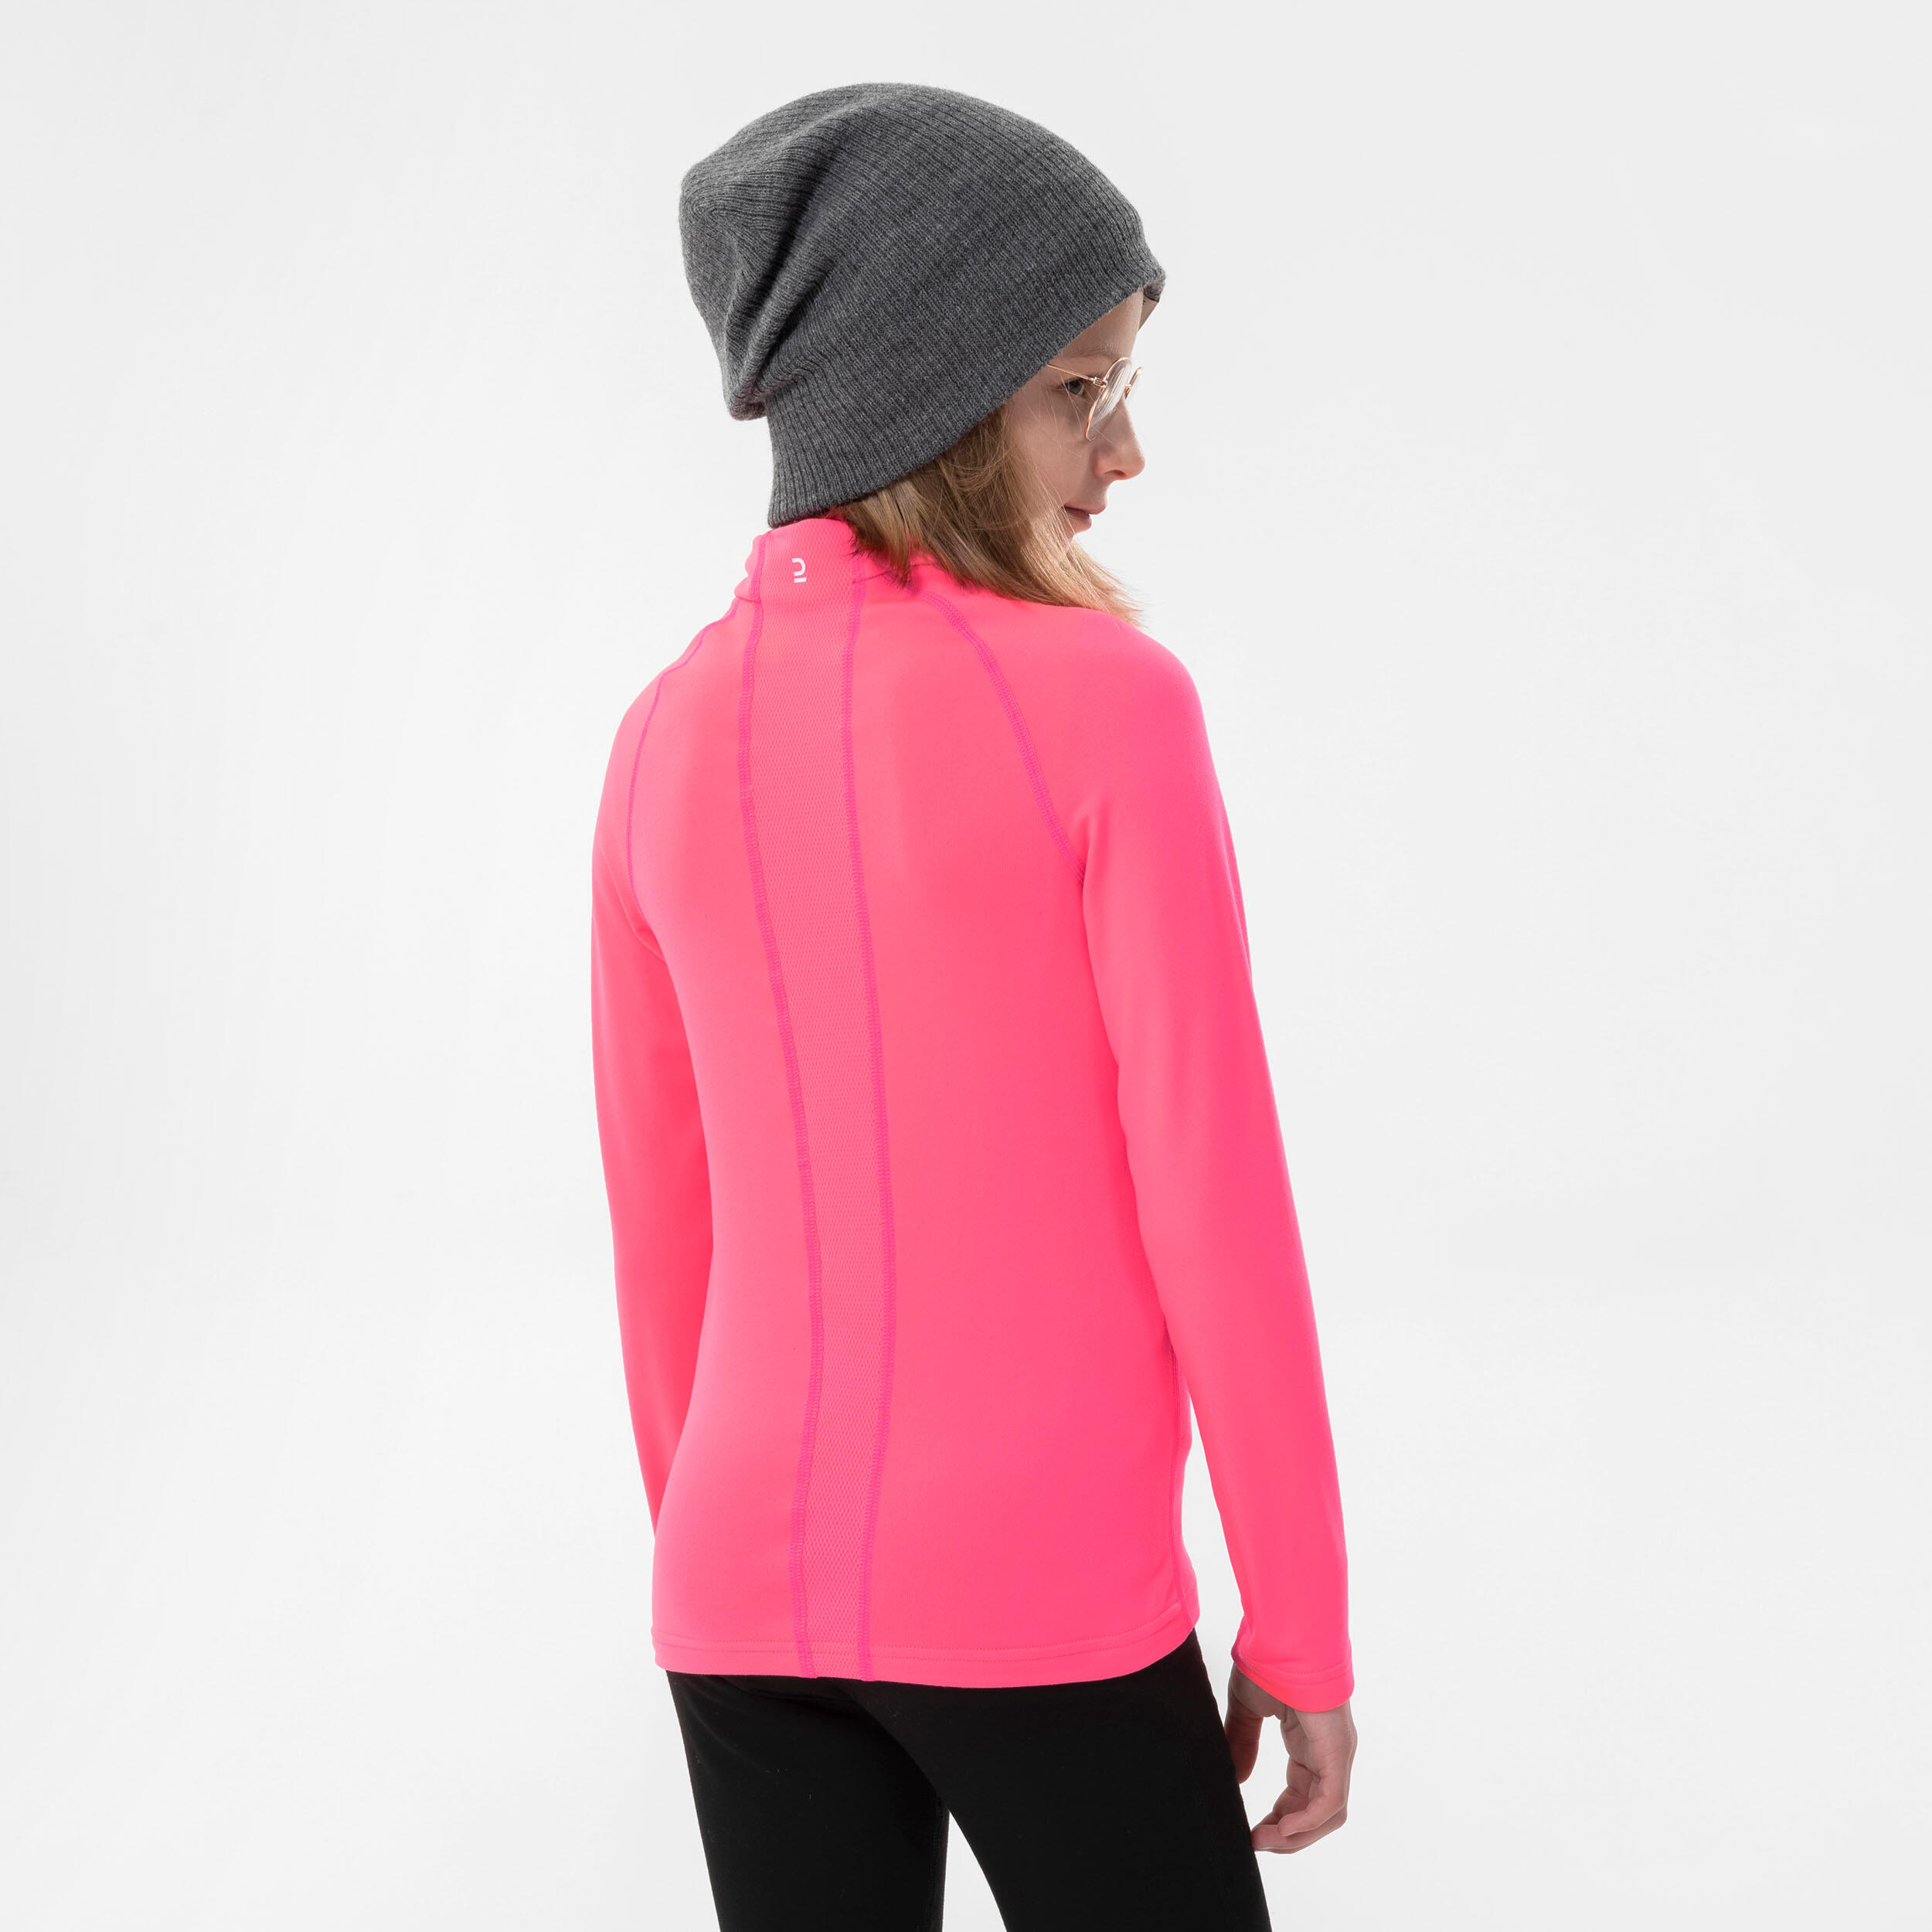 Patra Silks Introduces A New Range Of Kids' Silk Base Layers, Ideal  Underneath Children's Ski Wear. - Patra Selections Blog: Silk Clothing and  Underwear